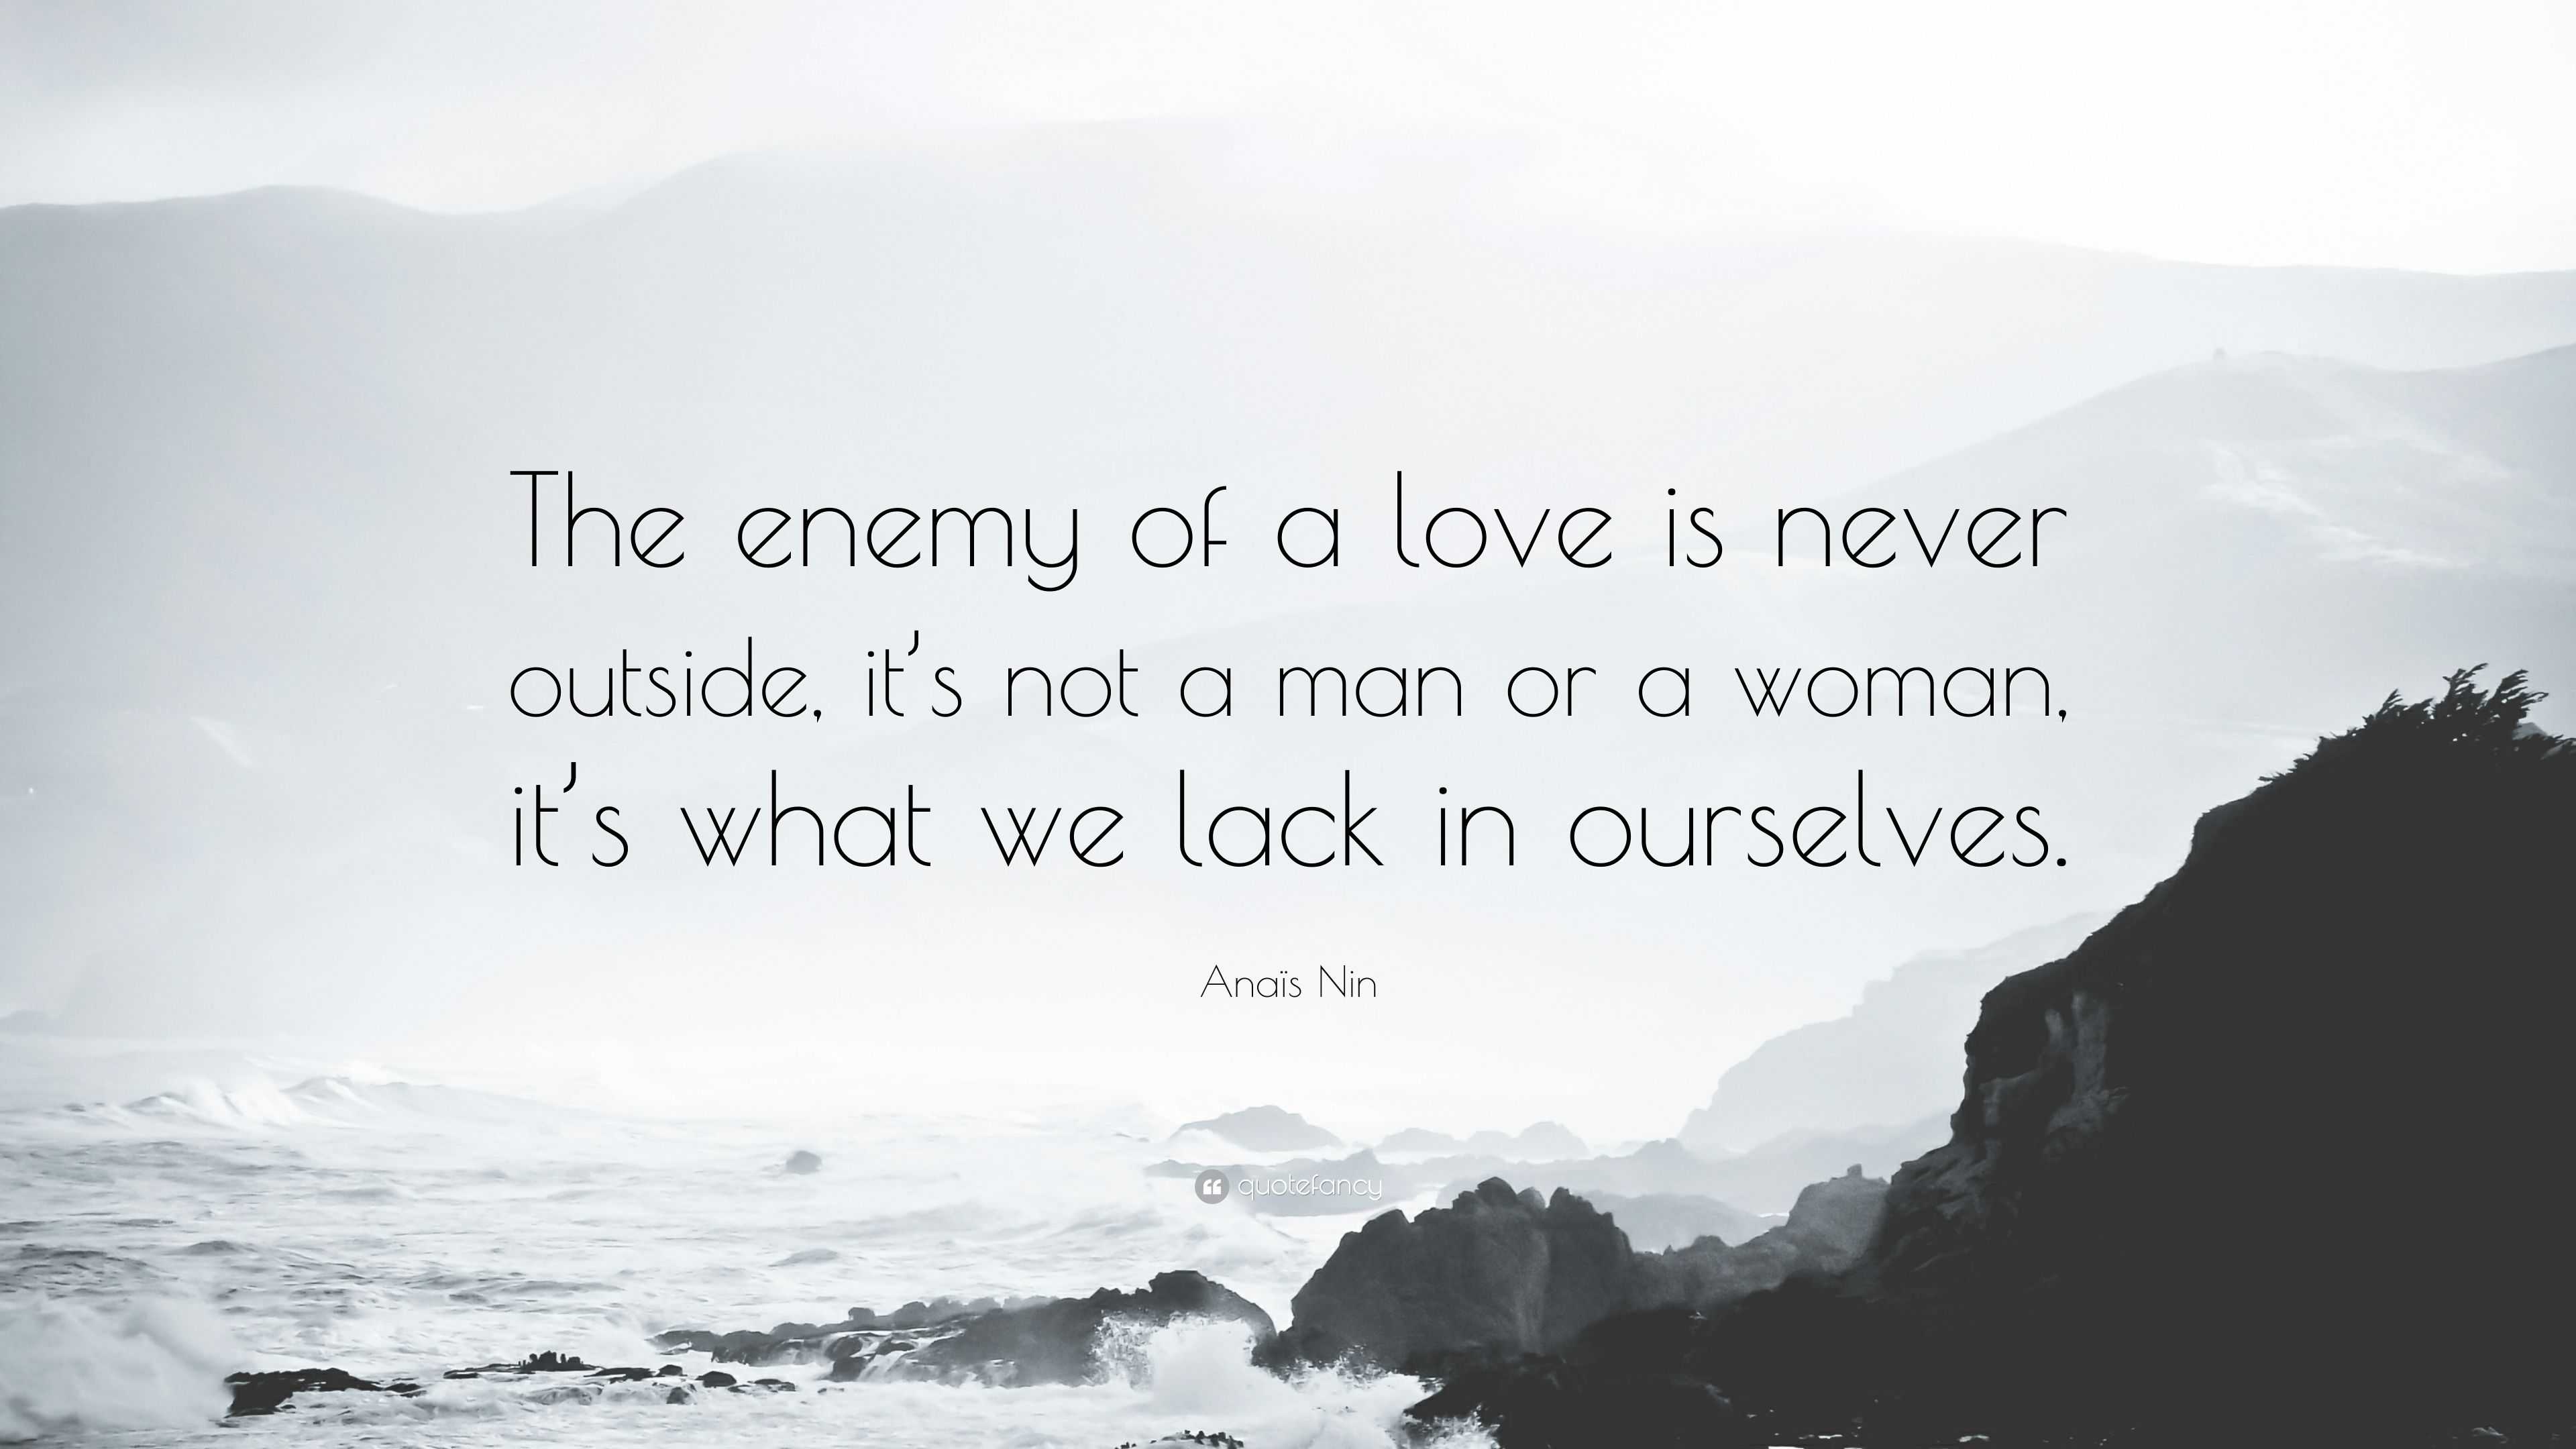 Anaïs Nin Quote: “The enemy of a love is never outside, it’s not a man ...